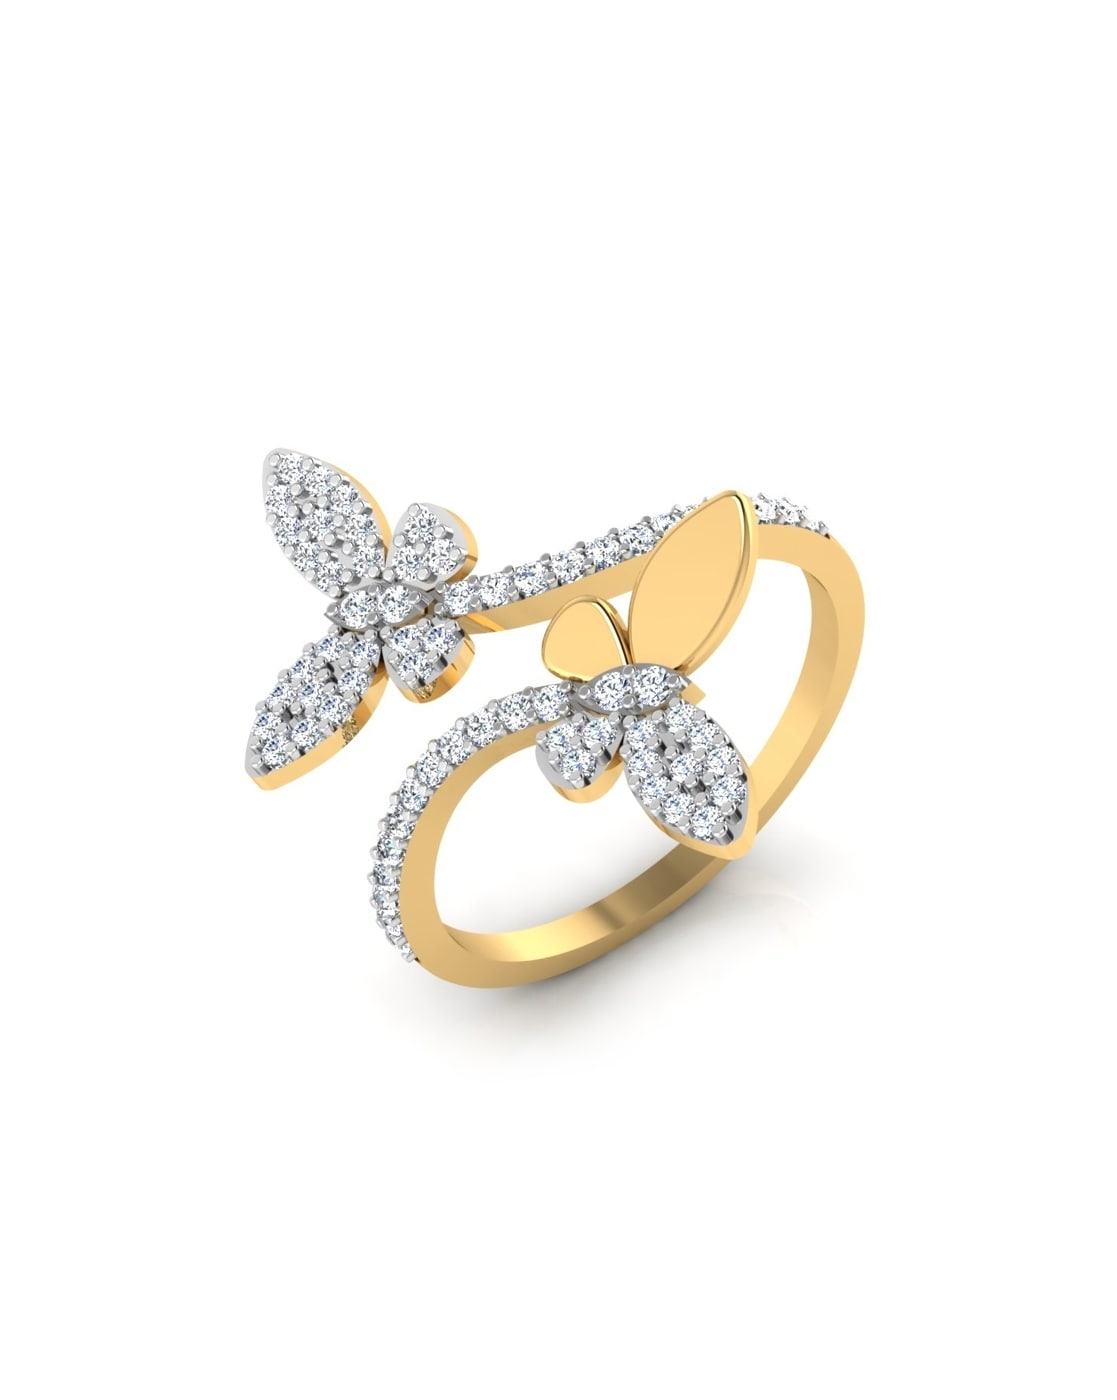 Adjustable, one size fits all 14K Gold Glitzy Butterfly Ring